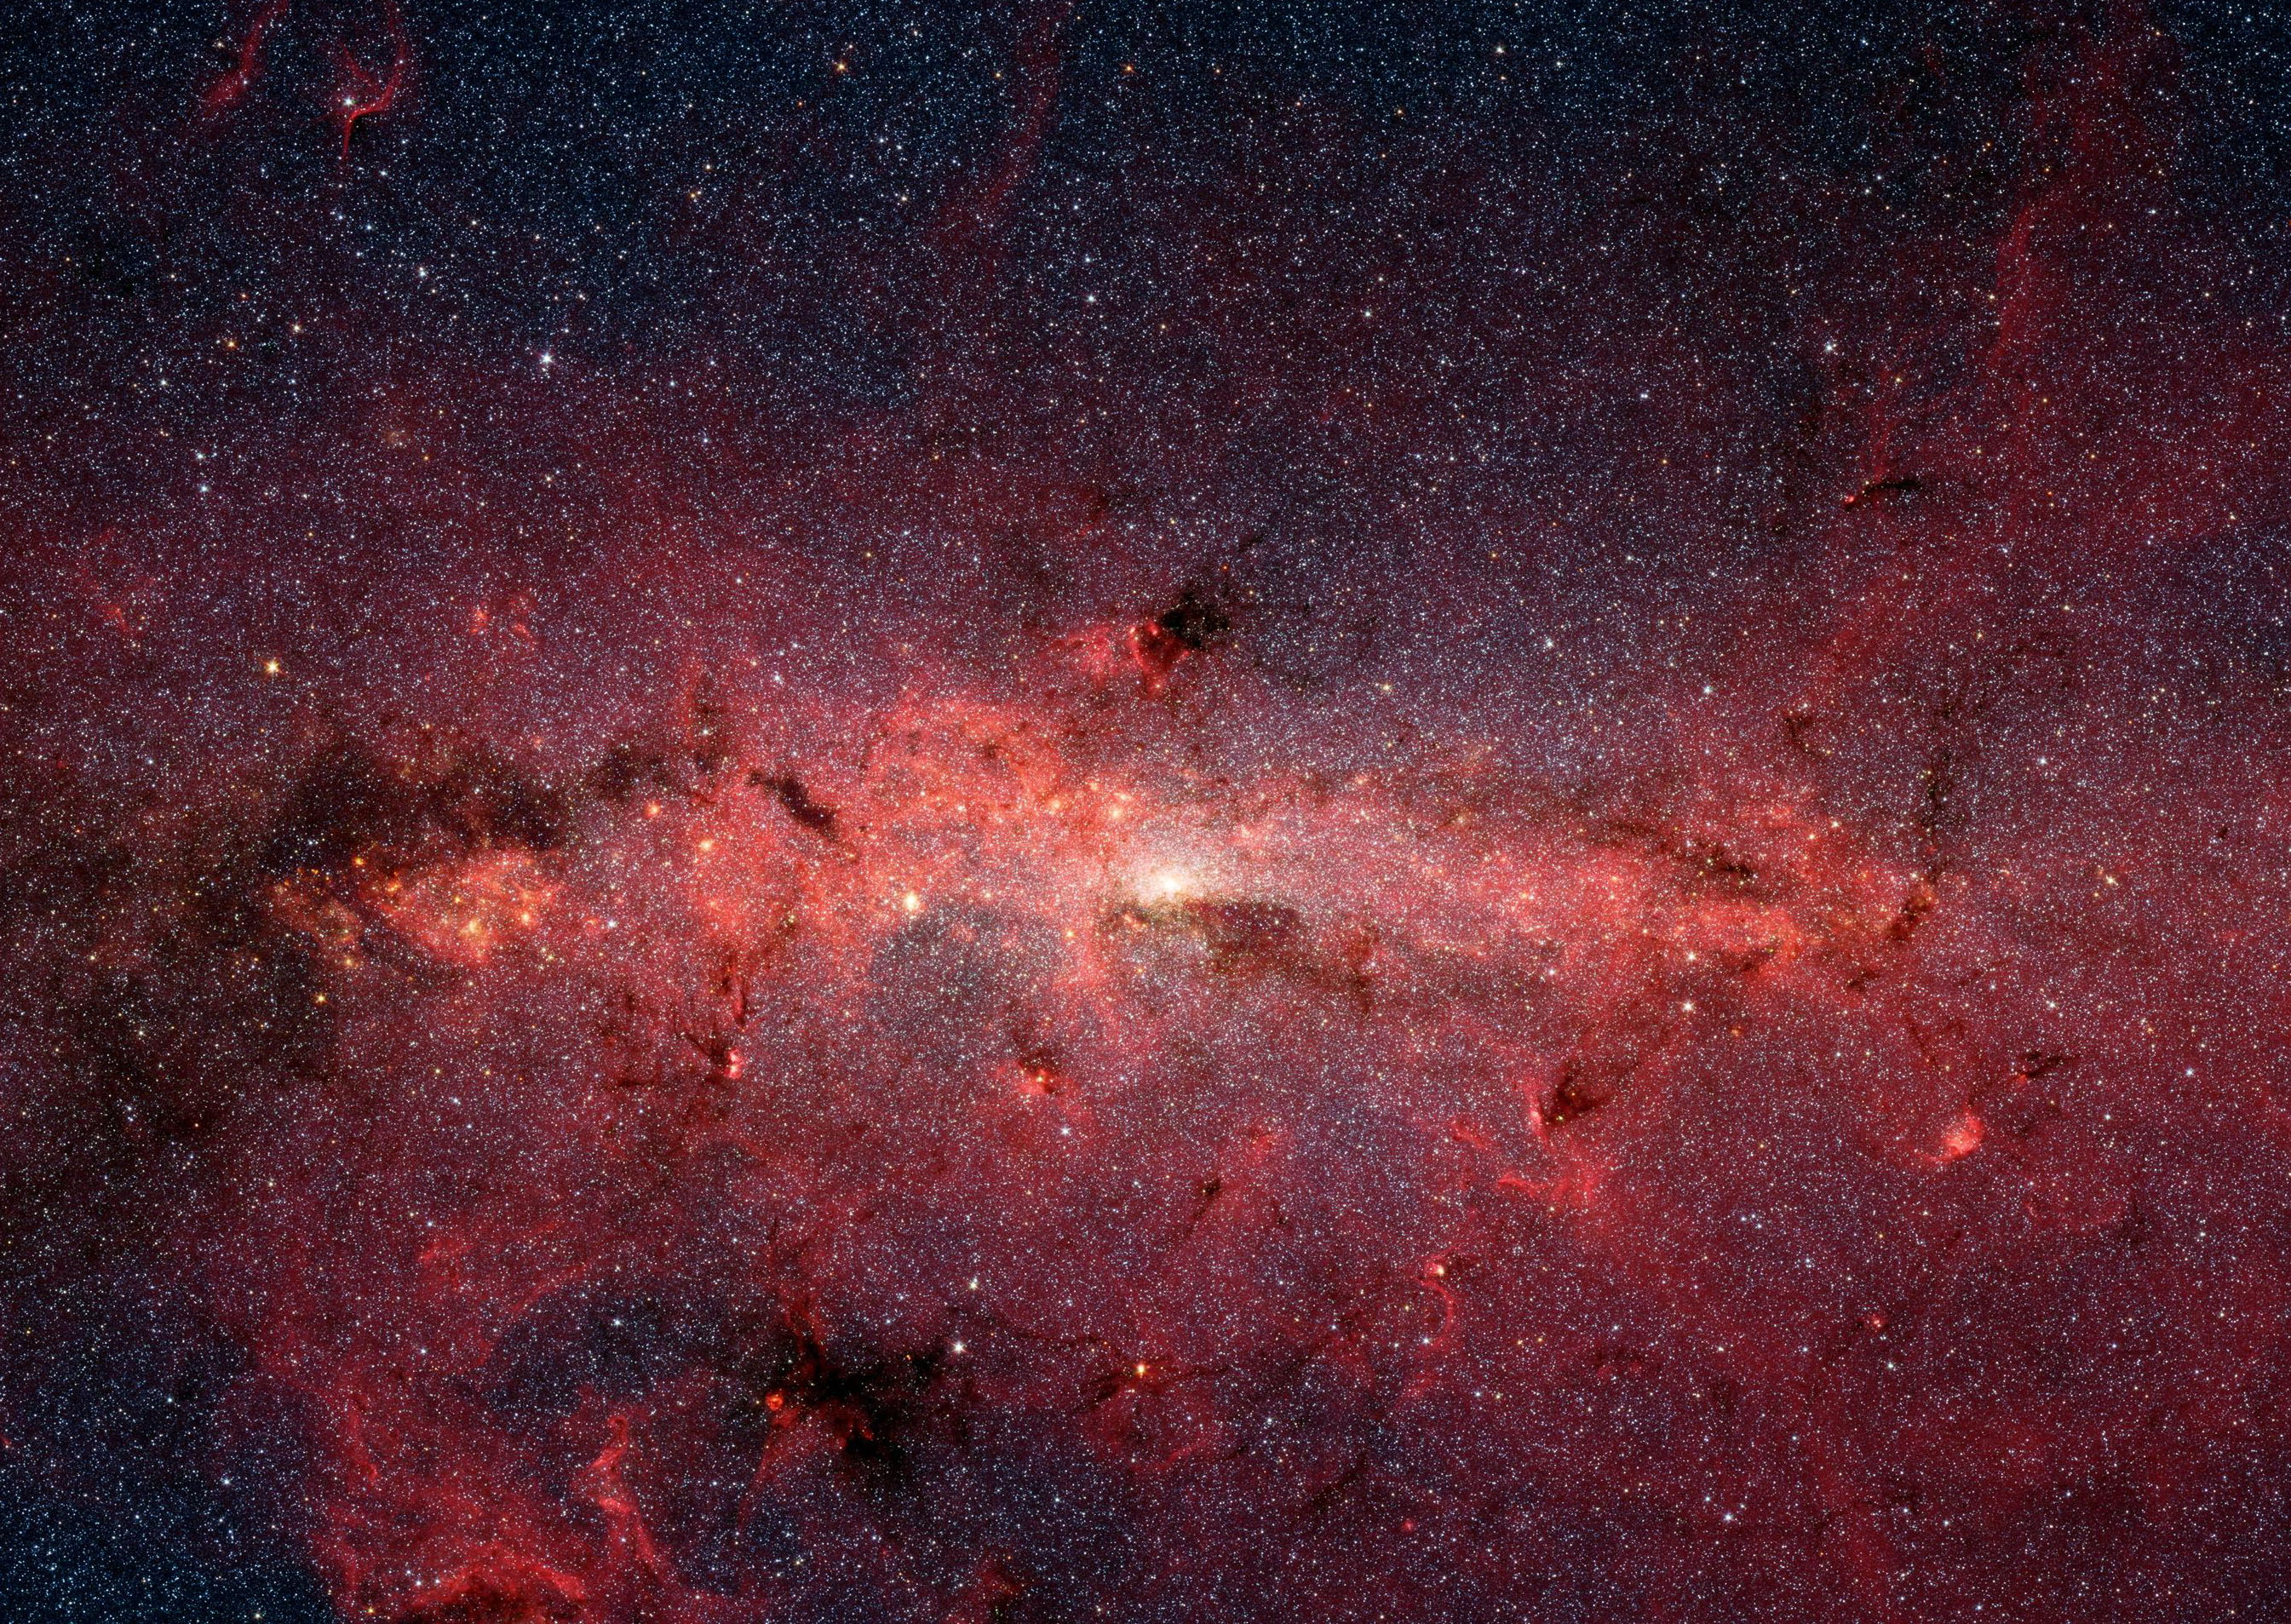 At the center of this starry vista is a bright white spot surrounded by warm knots of red clouds. The clouds extend across the image from left to right and nearly all the way from the bottom to the top, with some black sky visible toward the top of the image. Within the red wispy clouds, there are clouds that appear black, regions that are so dense, they are blocking our view.